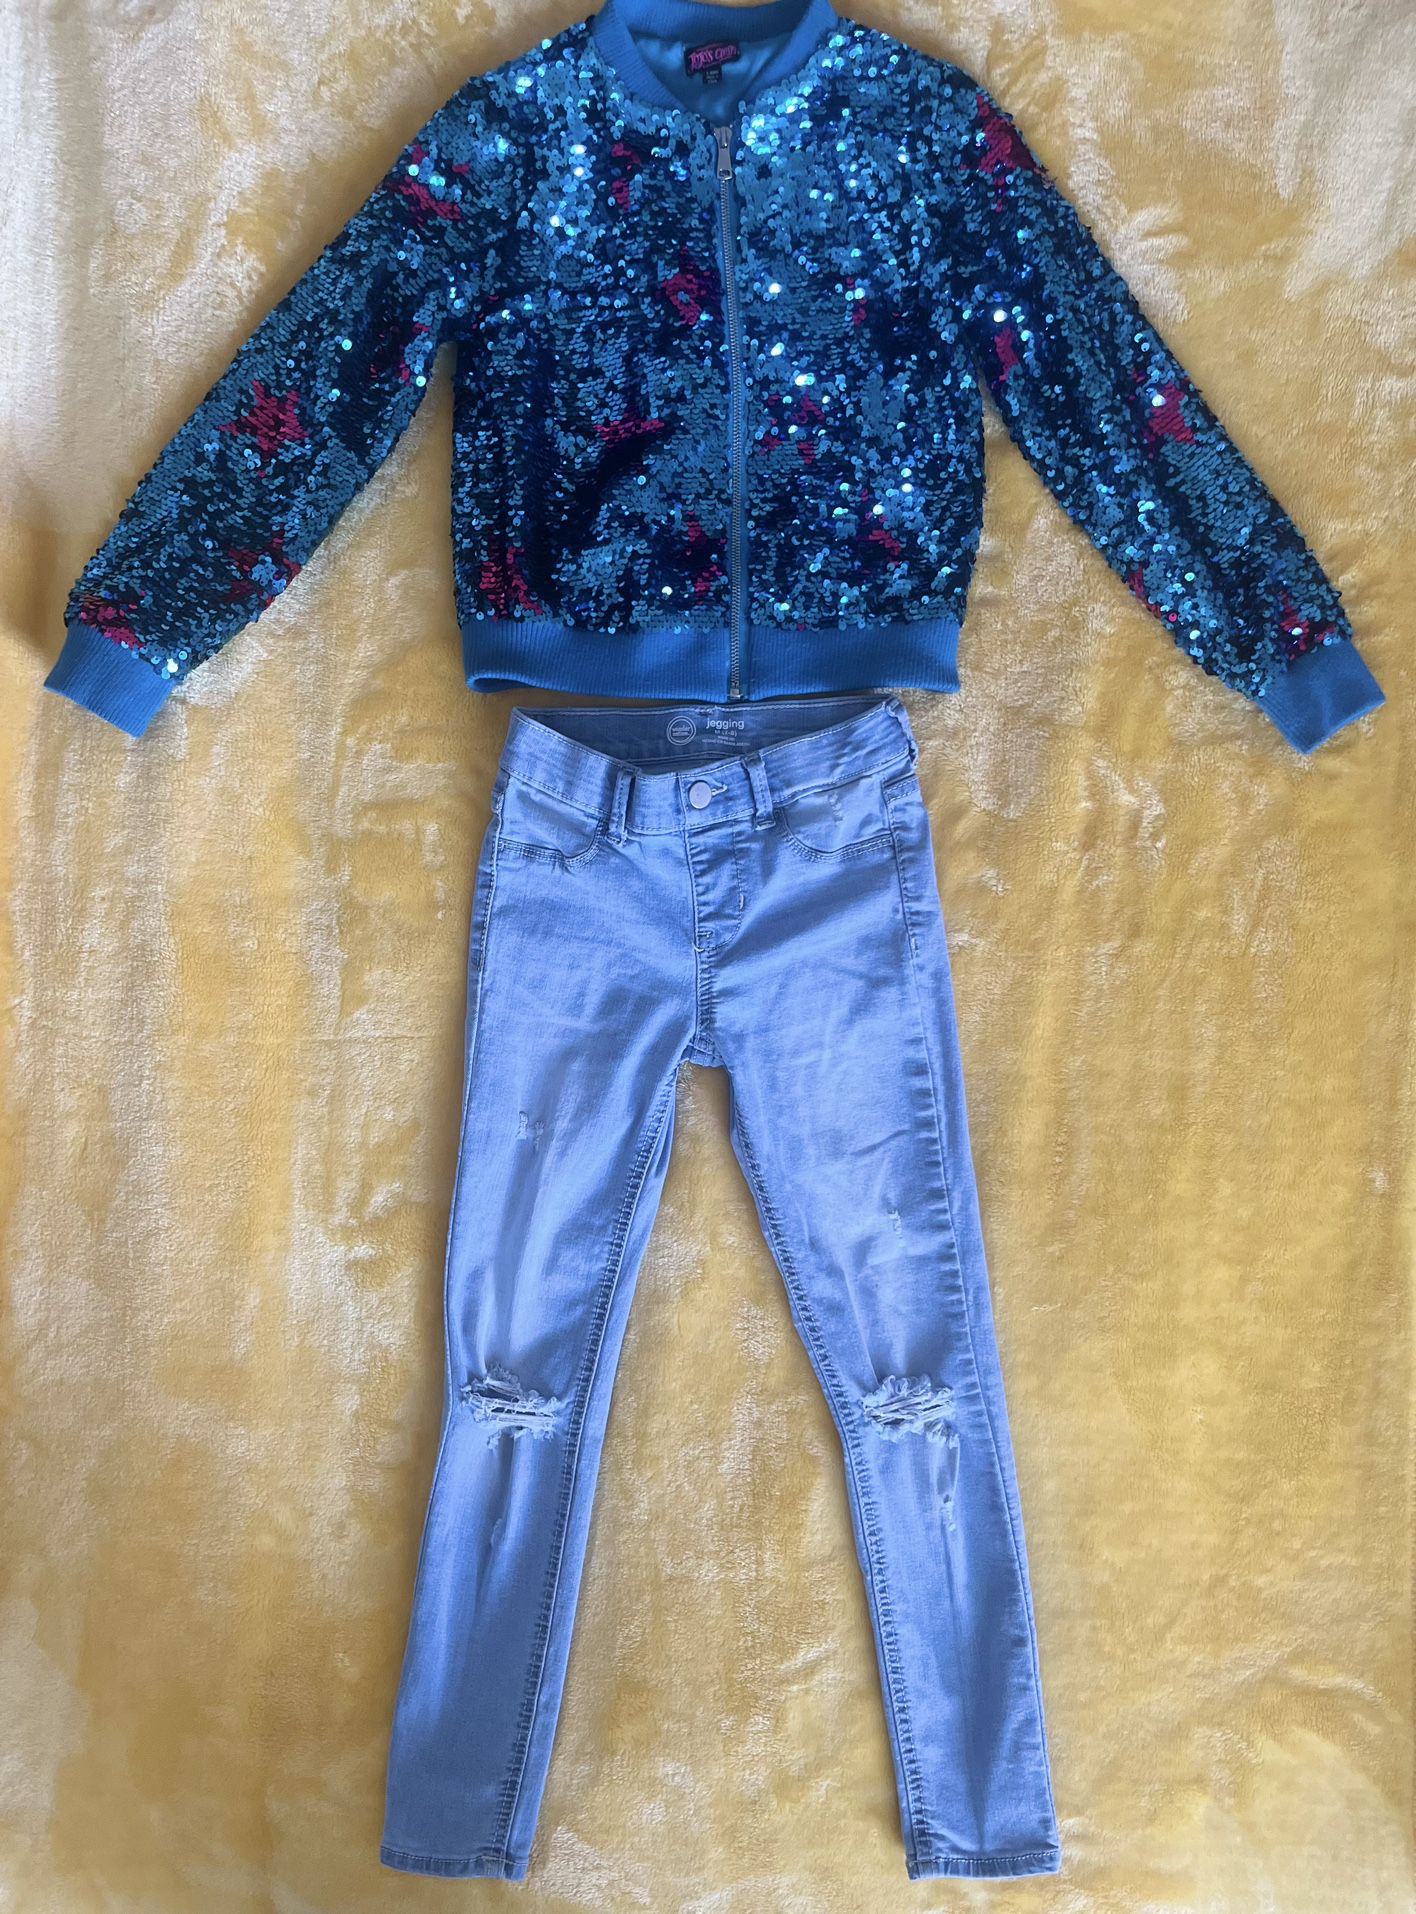 JoJo’s Sparkly Jacket/Jean Jeggings Outfit for Girl